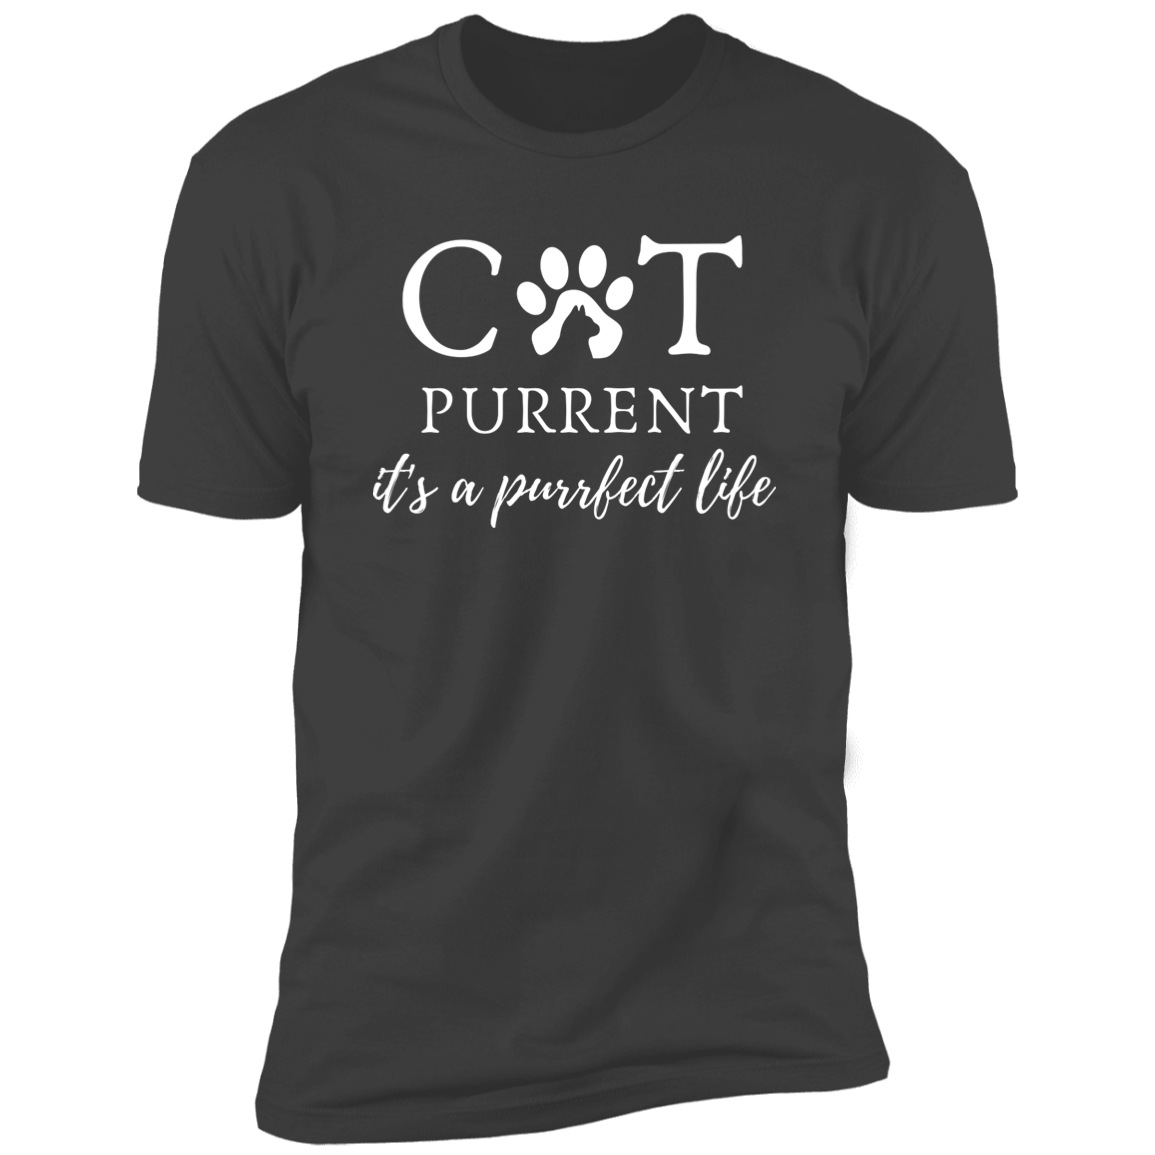 Cat Purrent It's a Purrfect Life T-shirt, Cat Parent Shirt for humans, in heavy metal gray